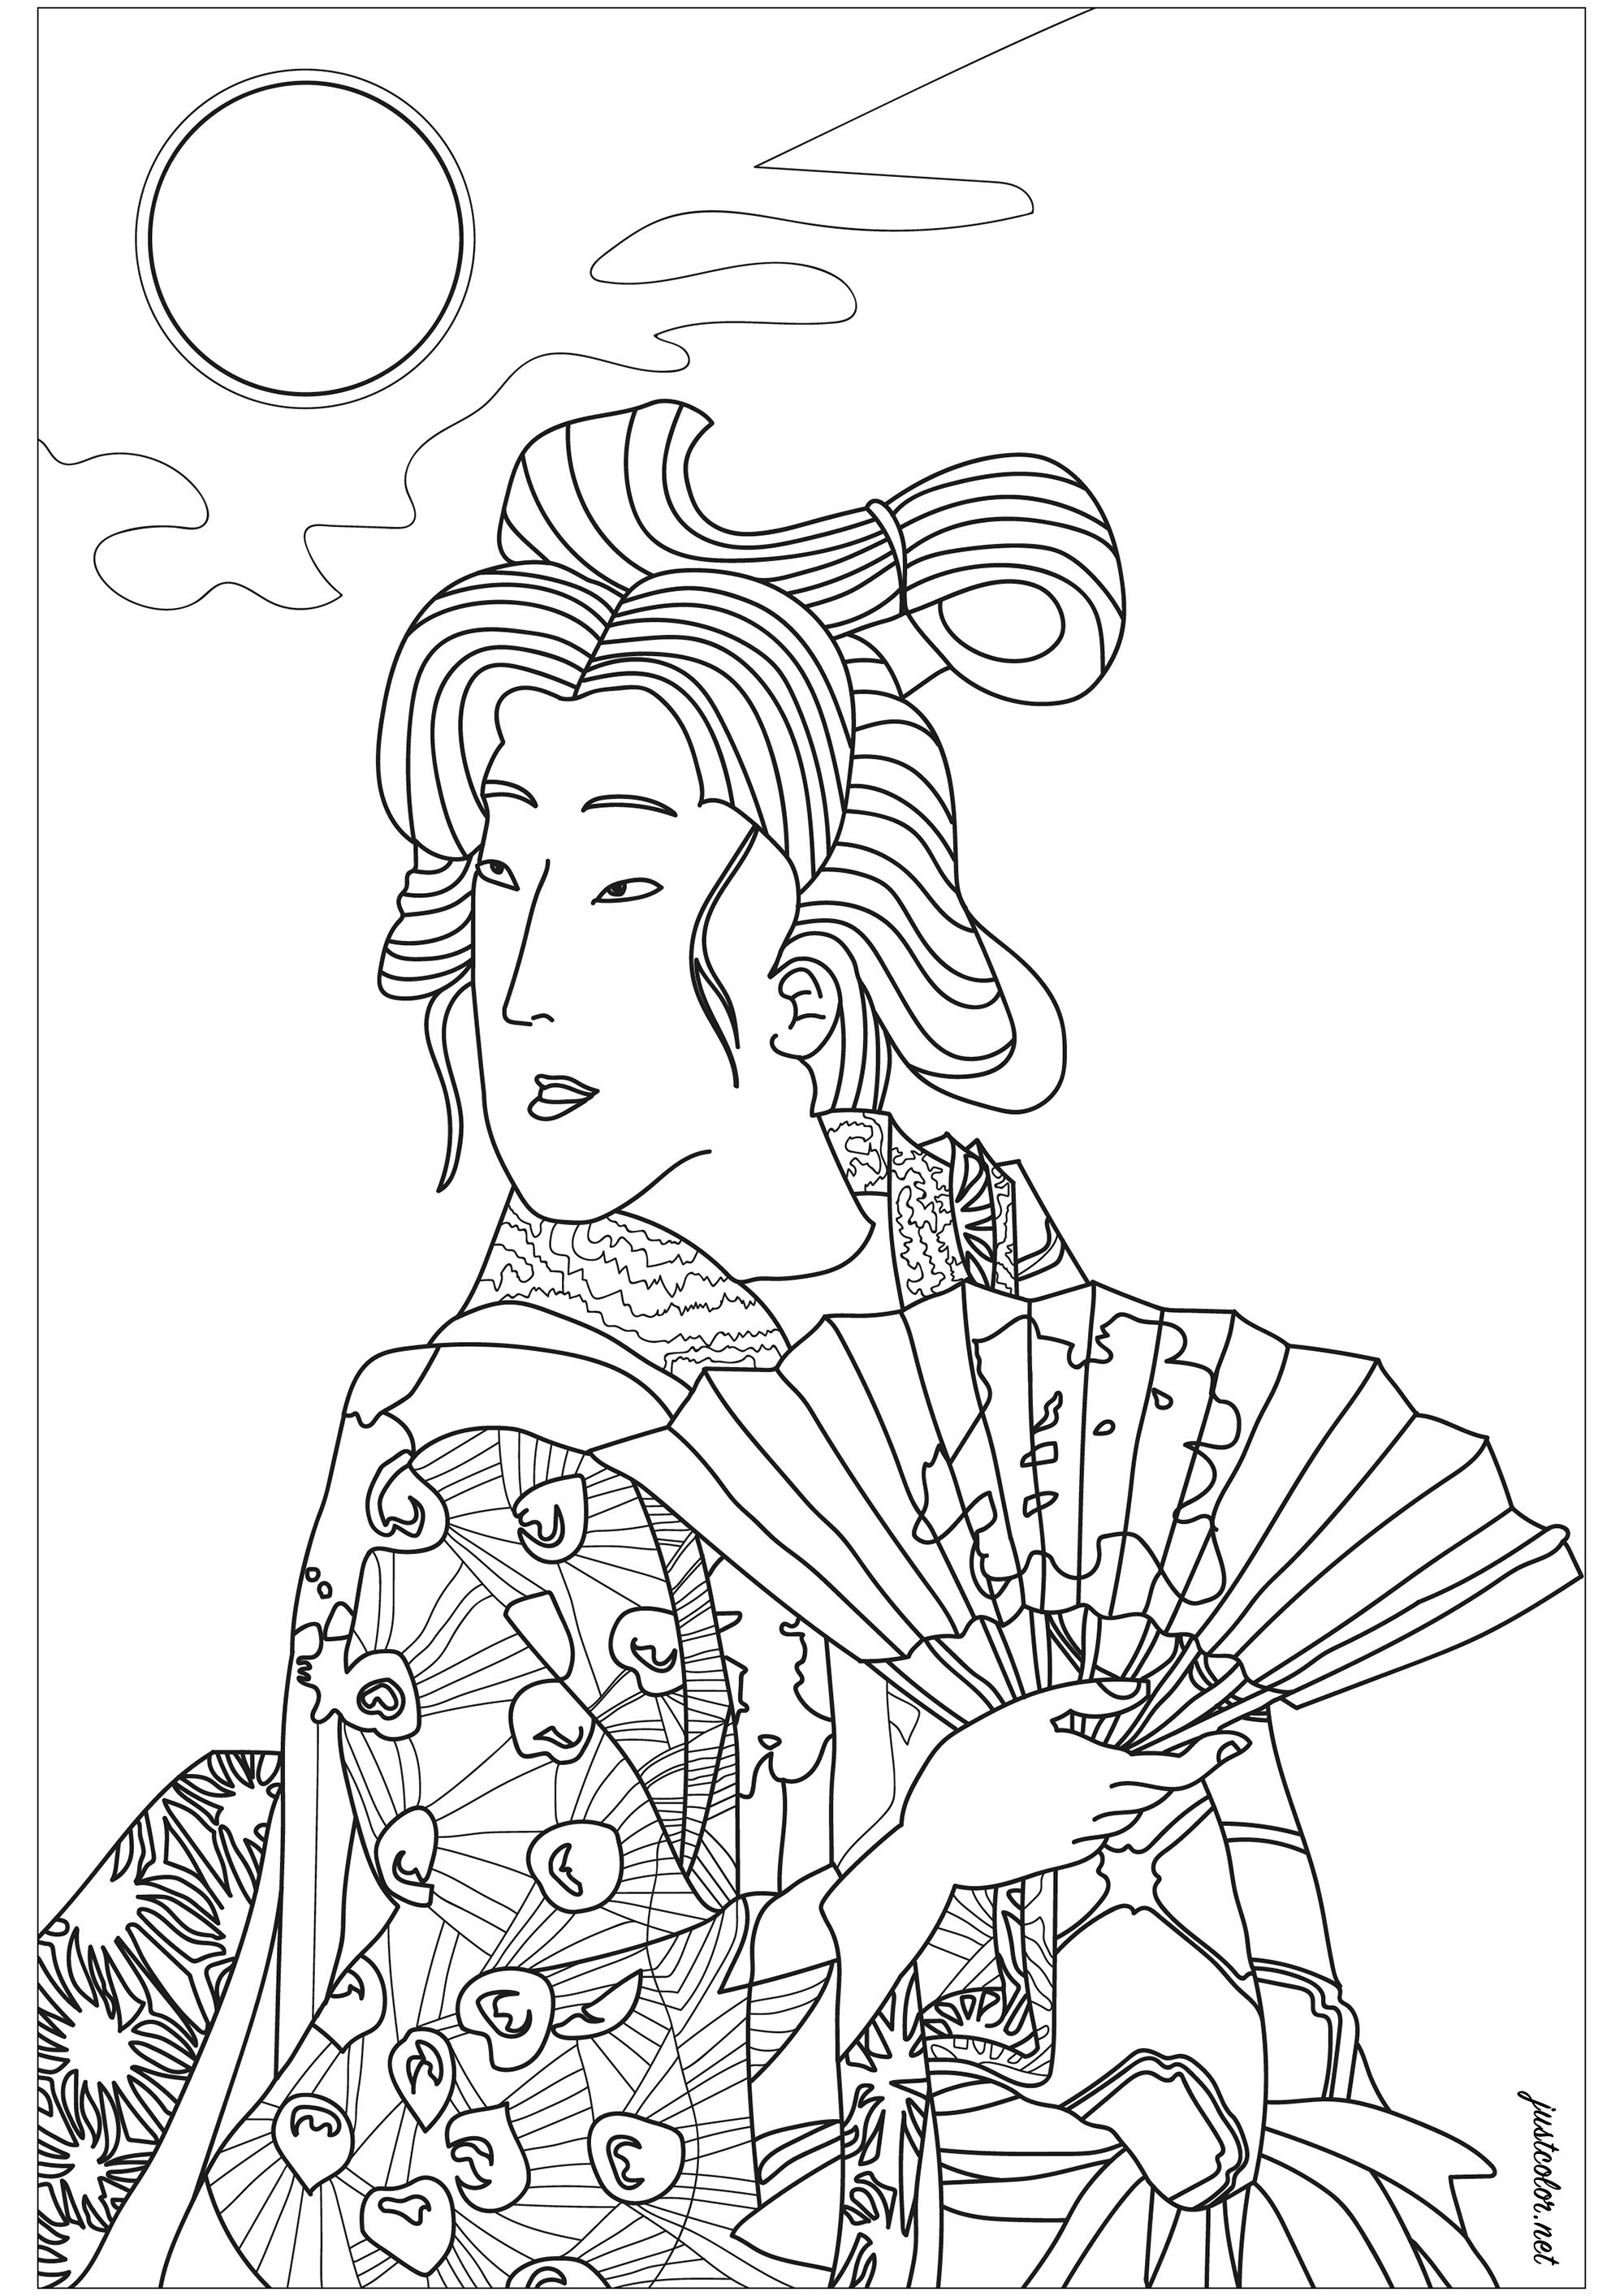 Portrait of a Geisha from a 19th century Japanese print by Yoshitoshi representing a woman in a kimono holding her fan under a full moon